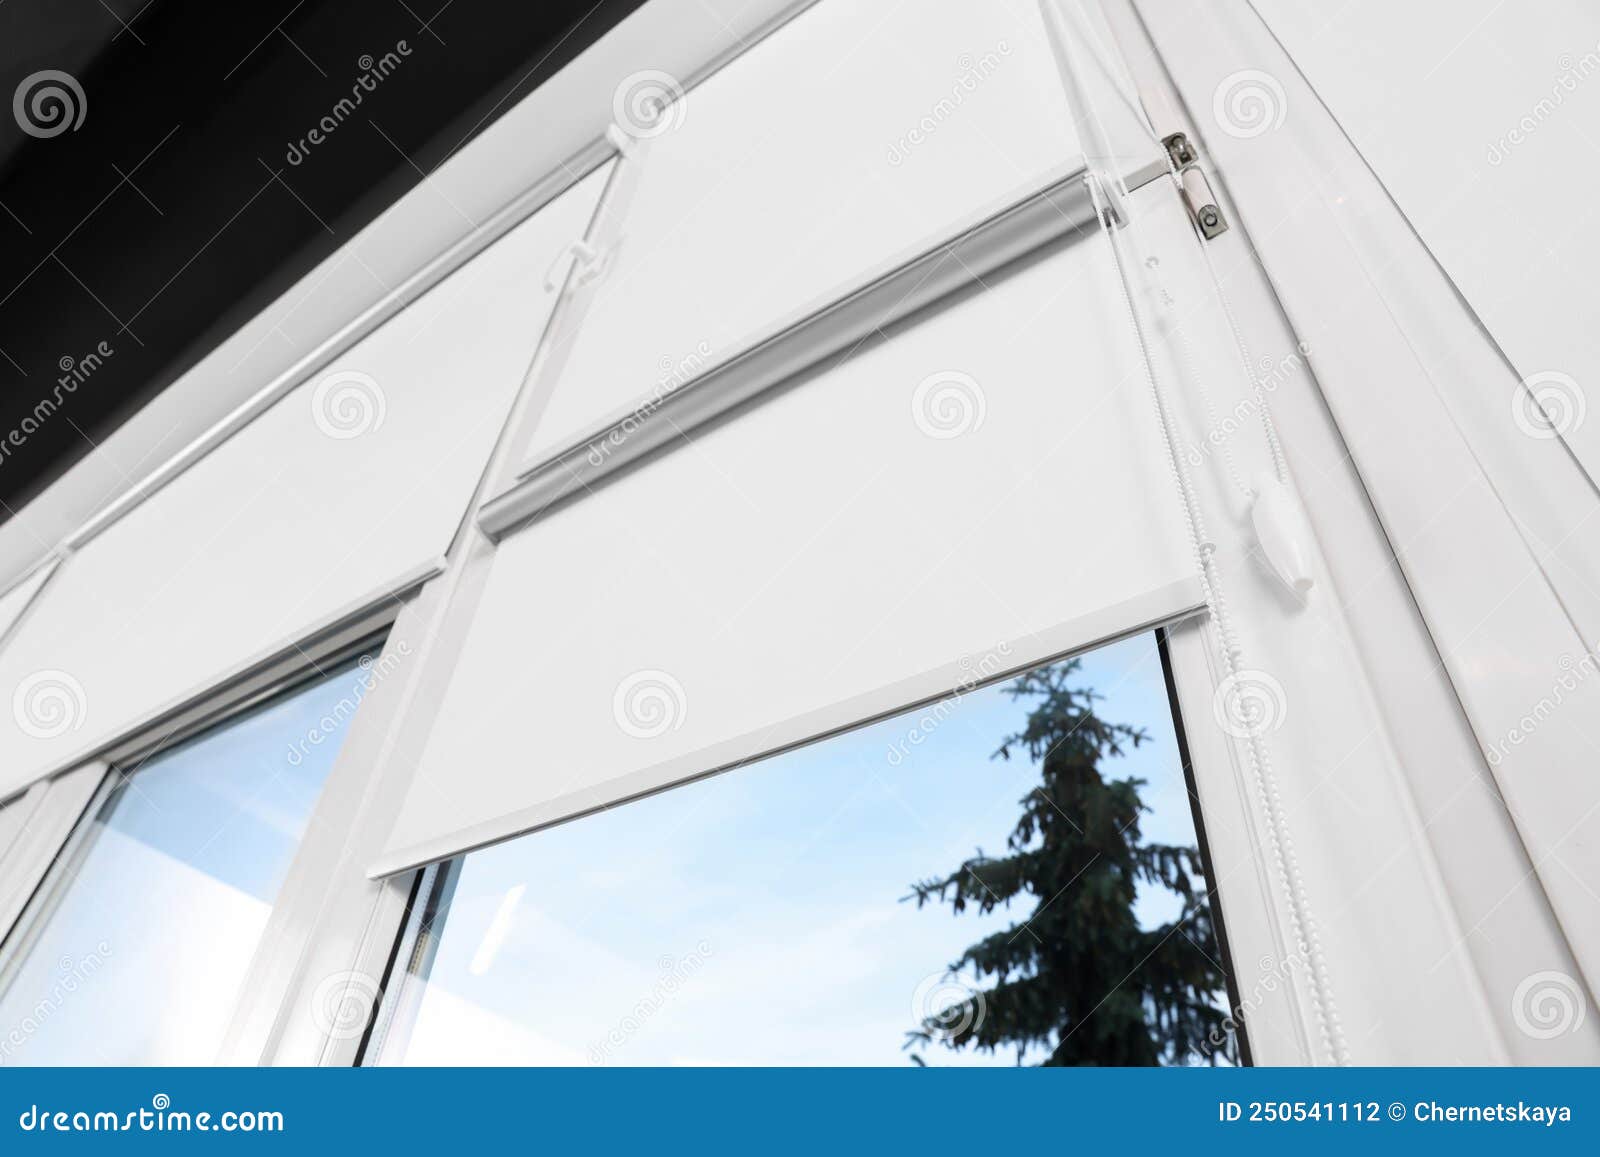 window with white roller blinds indoors, low angle view